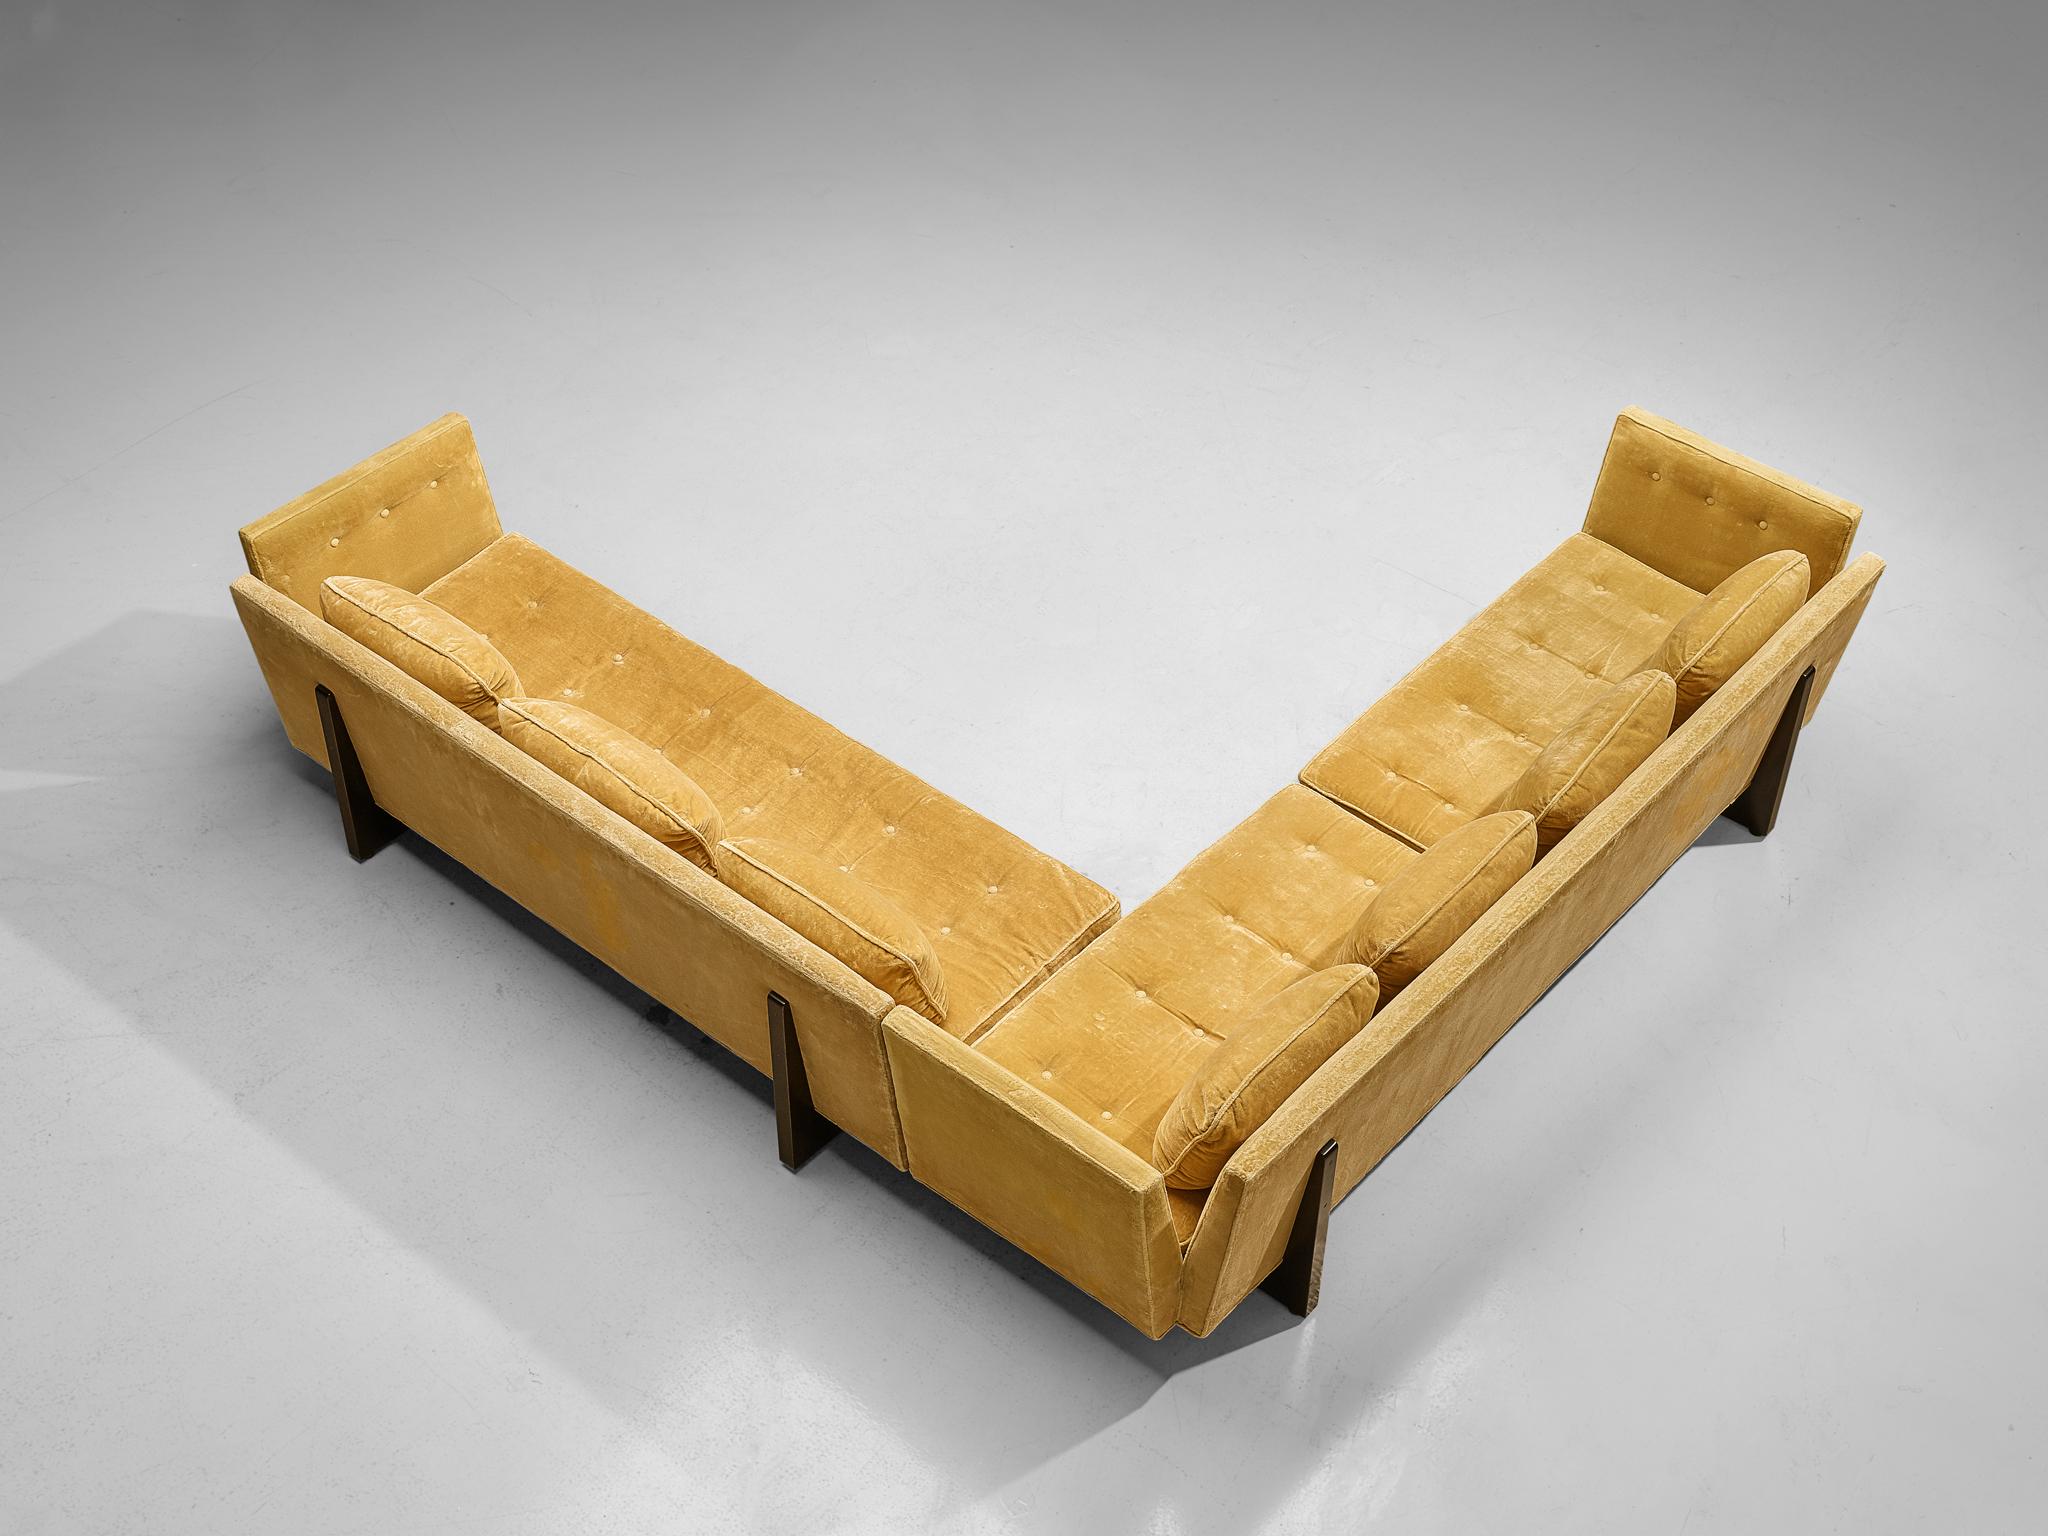 Edward Wormley for Dunbar, two part corner sofa, wood, velvet upholstery, United States, 1960s

Edward Wormley designed this large corner sofa for Dunbar in the 1960s. Characterized is the design by the outwards inclined armrests which add a certain